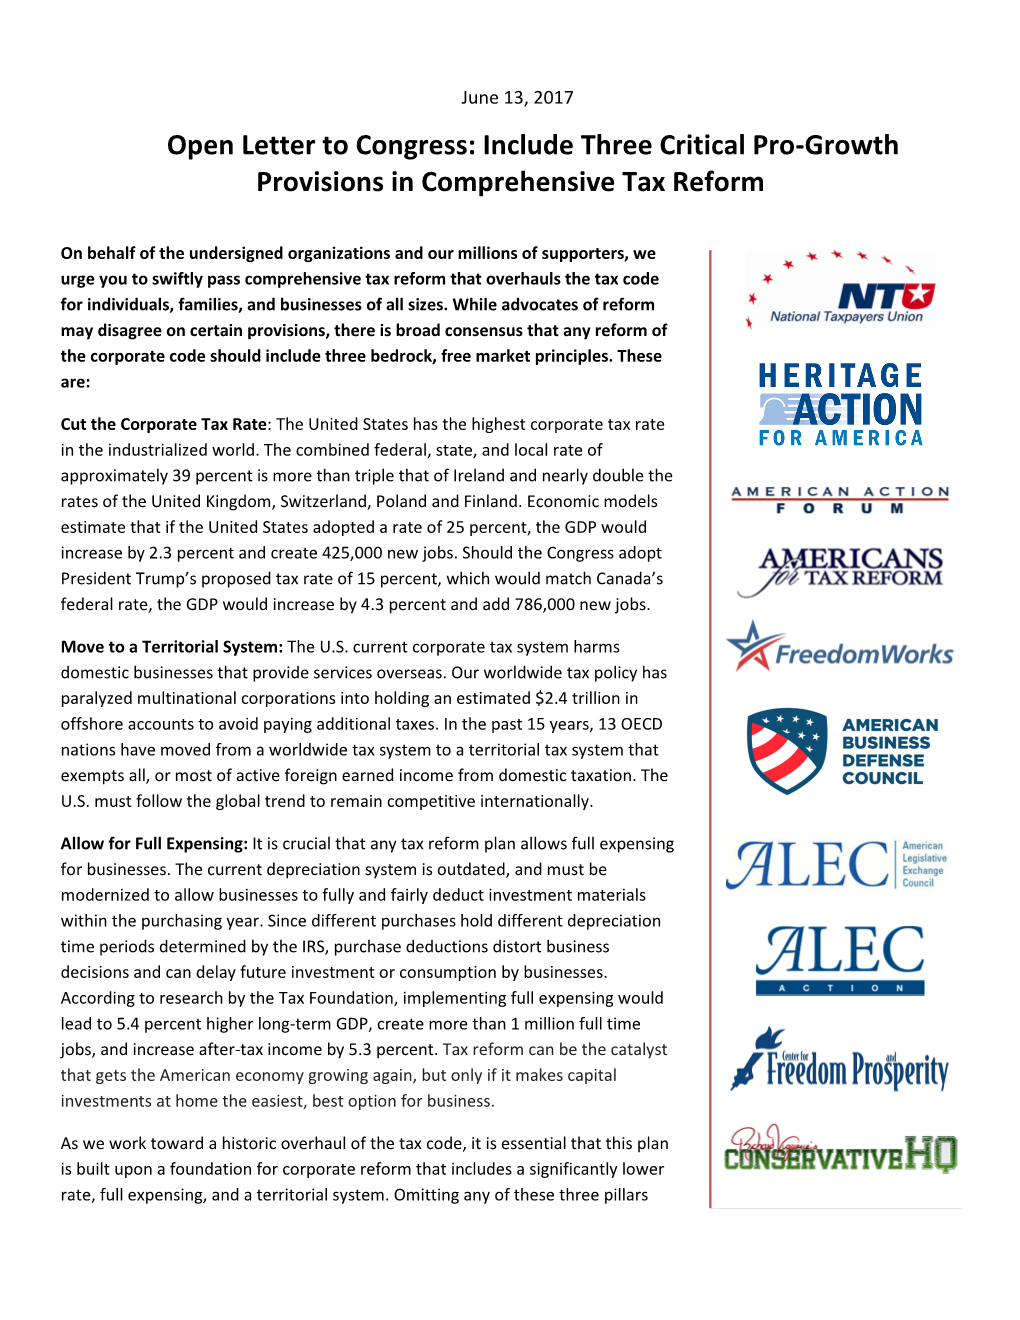 Open Letter to Congress: Include Three Critical Pro-Growth Provisions in Comprehensive Tax Reform